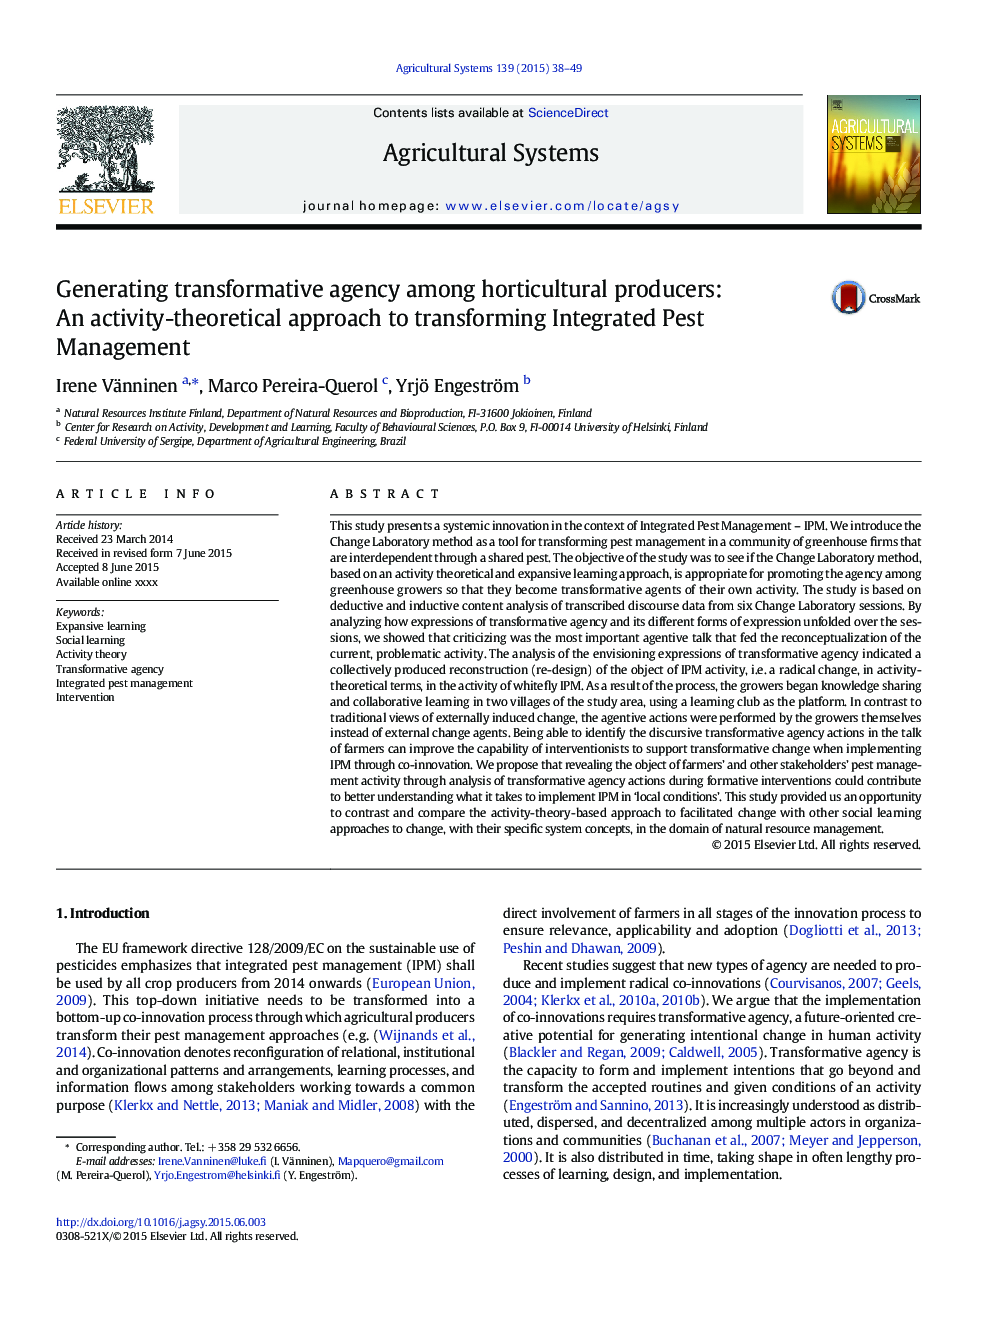 Generating transformative agency among horticultural producers: An activity-theoretical approach to transforming Integrated Pest Management